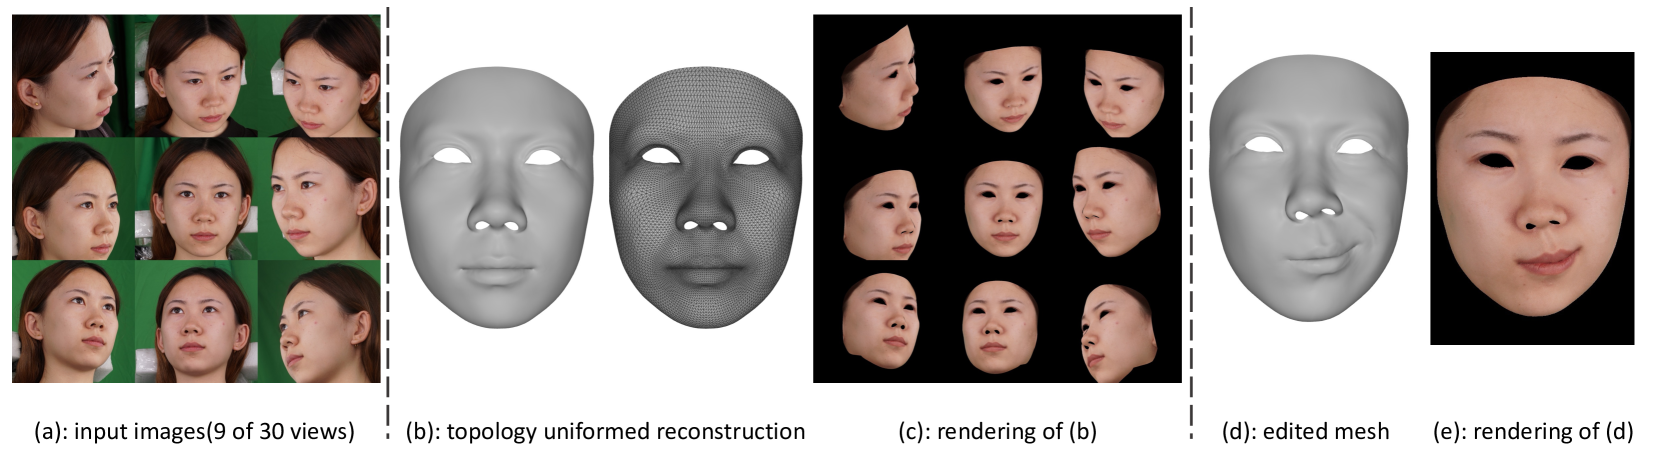 Learning Topology Uniformed Face Mesh by Volume Rendering for Multi-view Reconstruction